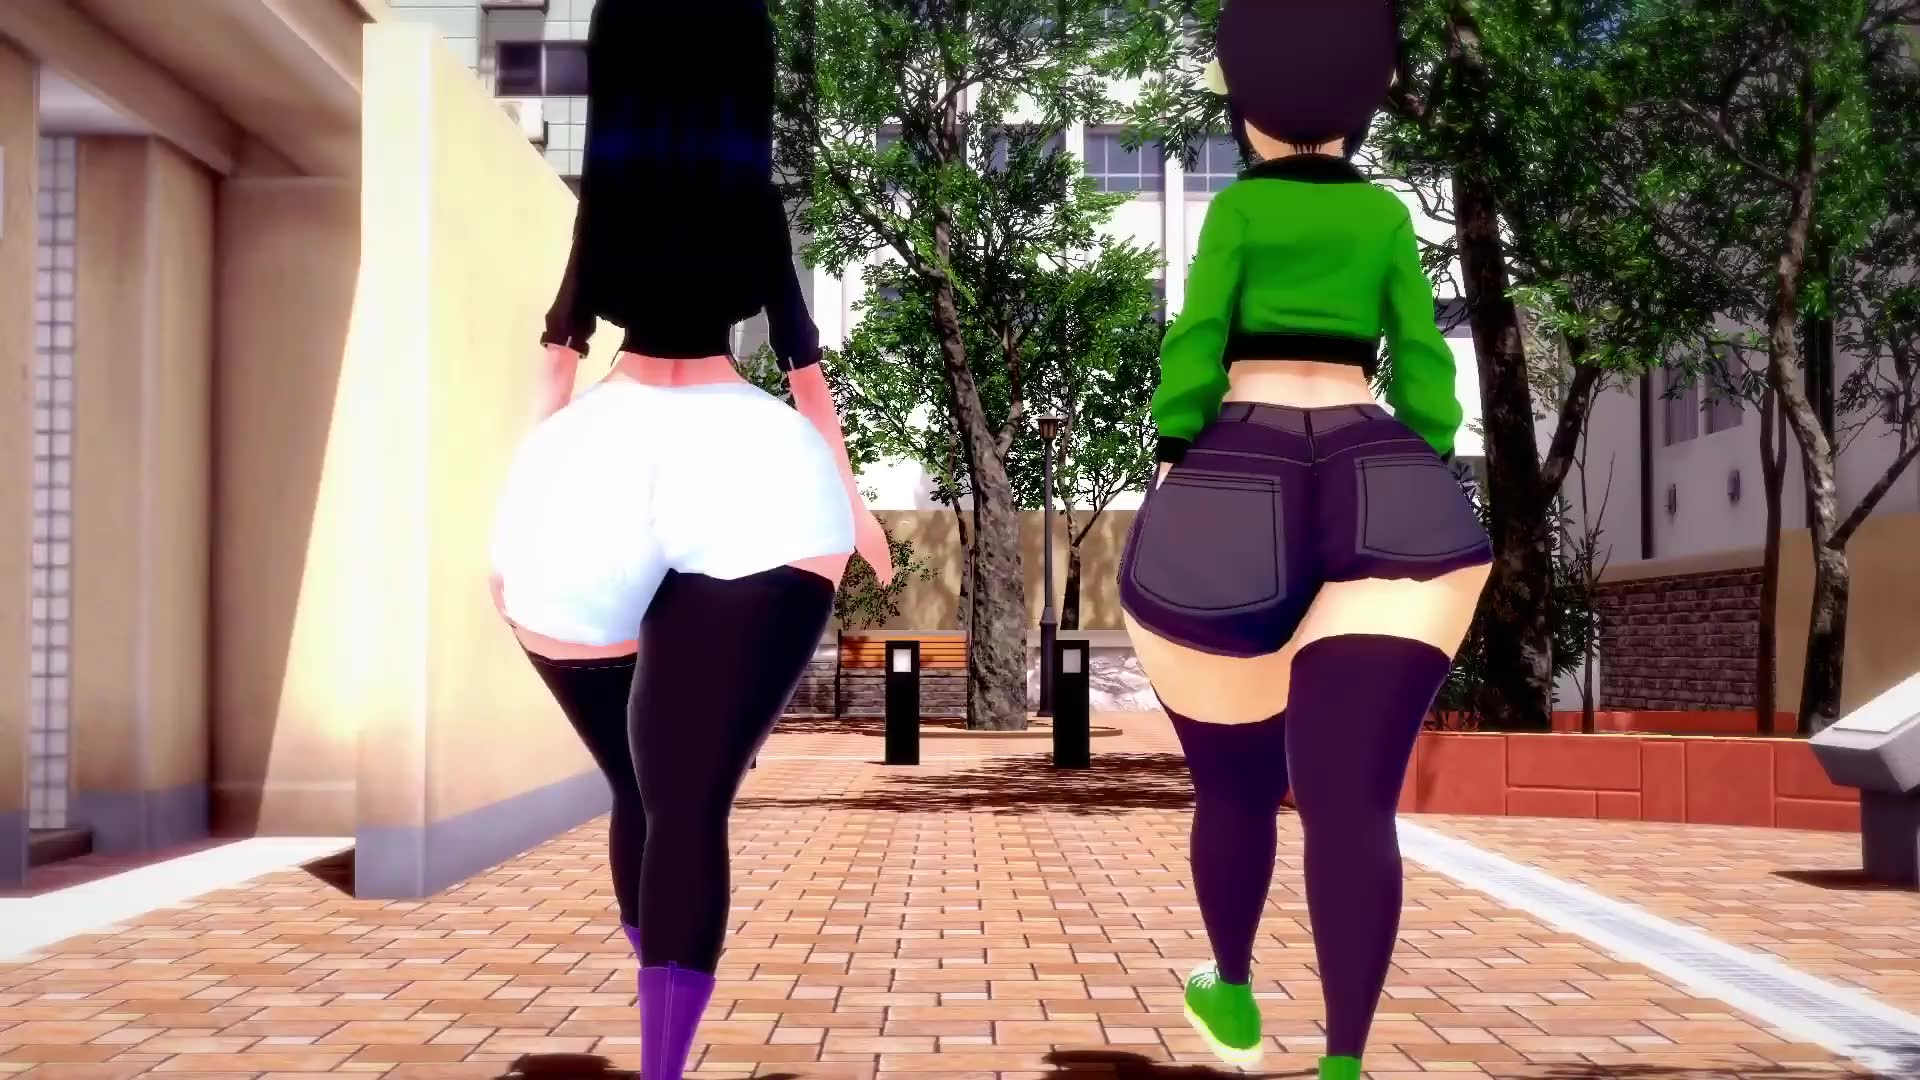 8 hot girls catwalk in outdoor with their massive ass NSFW animation thumbnail